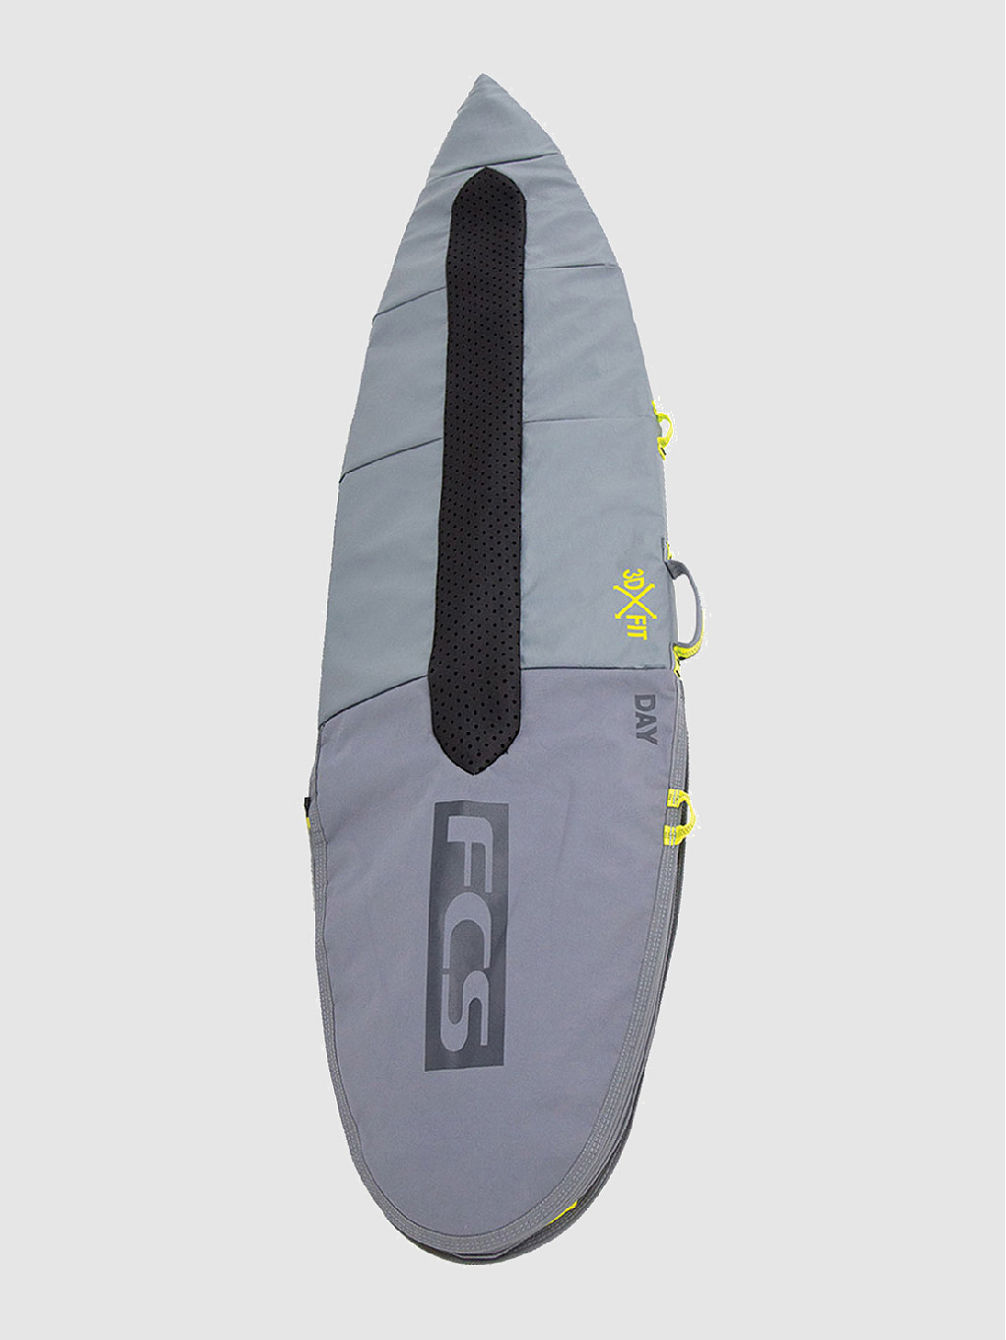 Day All Purpose 6&amp;#039;7 Surfboard Bag